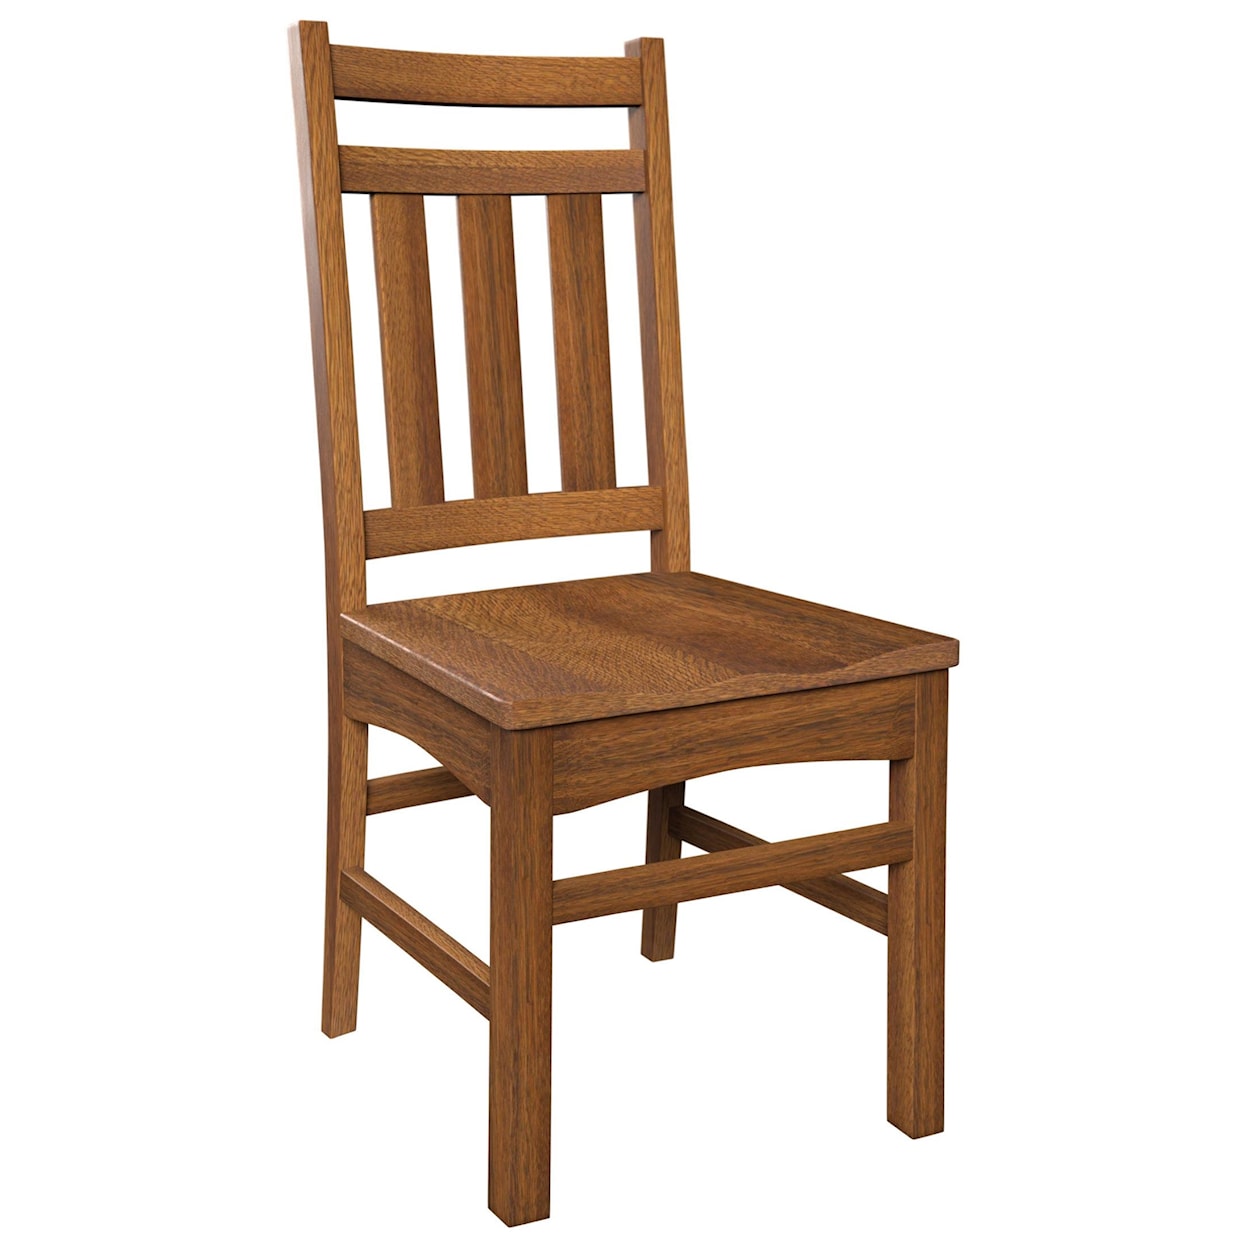 Wengerd Wood Products Montreal Side Chair